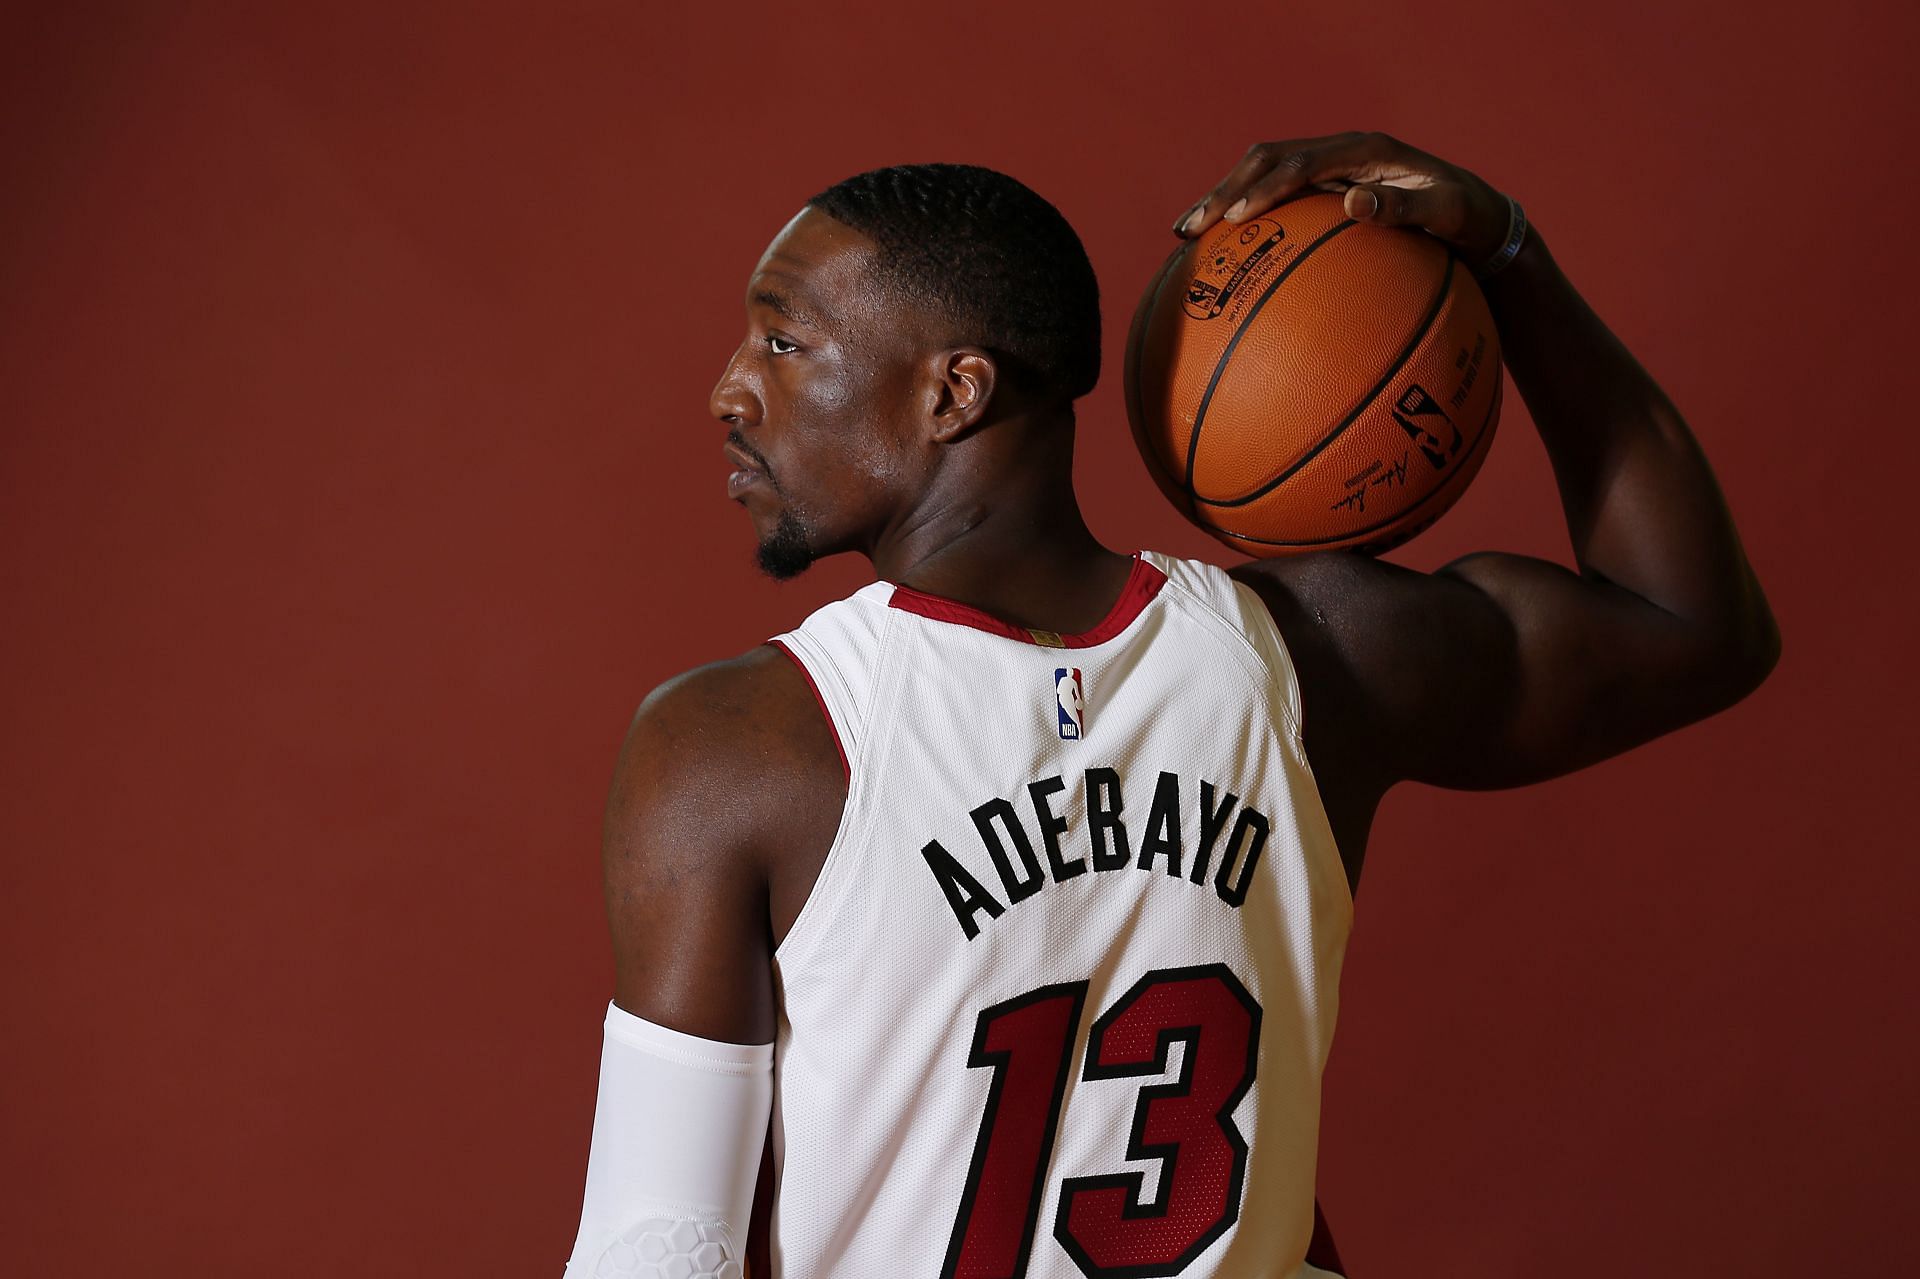 Miami Heat center Bam Adebayo is expected to miss four-to-six weeks.